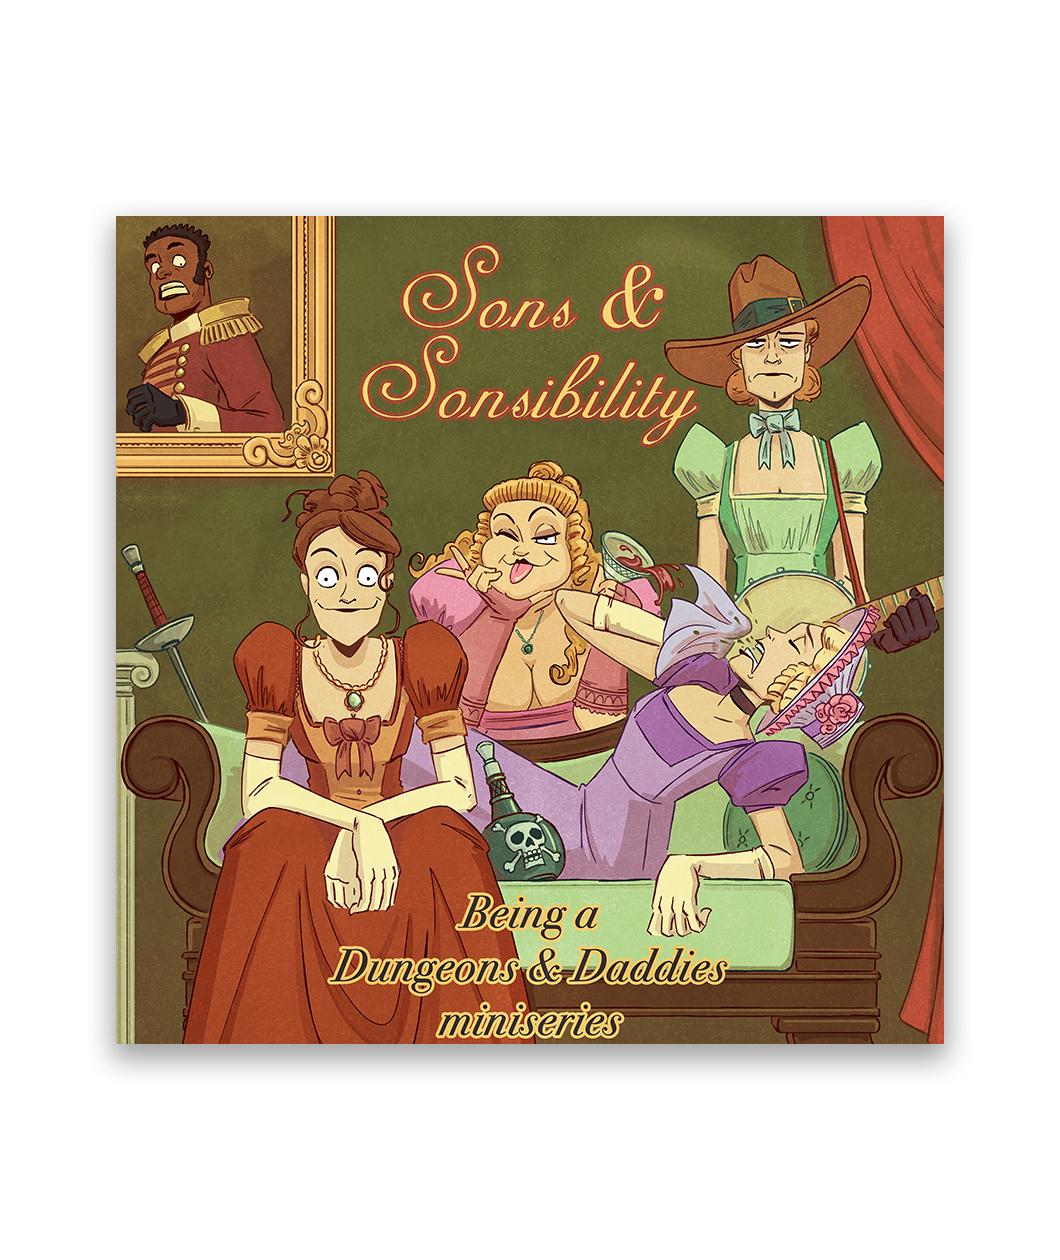 Cover art for Sons & Sonsability. There are four women in 19th century colorful dresses, one rusty red, one lavender, one pink, and one mint green. There is a prince in portrait behind them that looks disgusted. Text at the bottom of the cover says, 